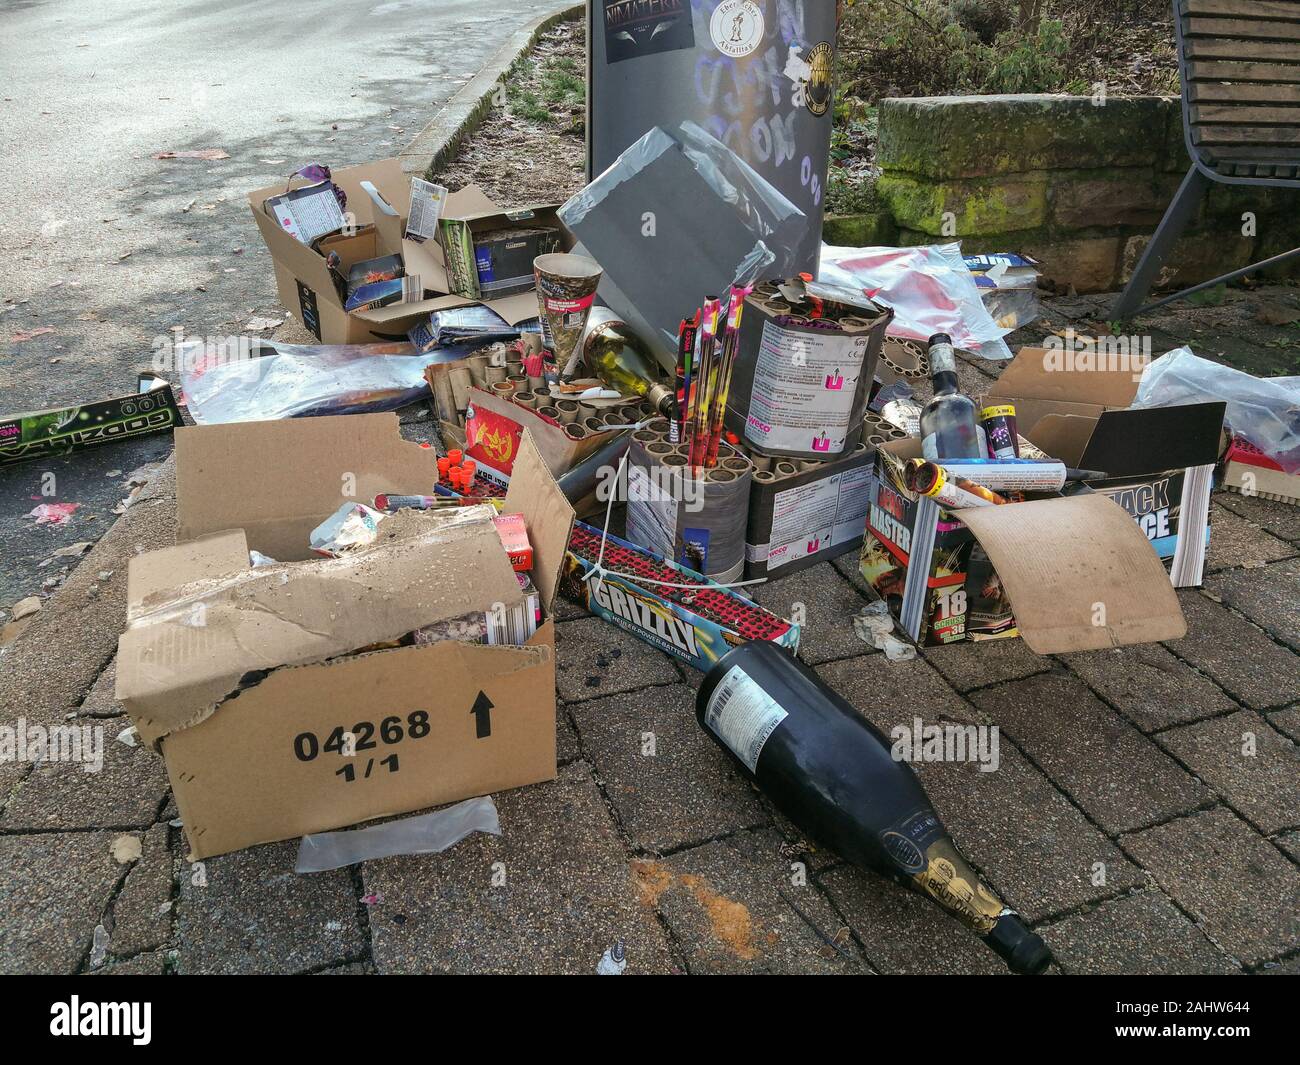 NECKARGEMÜND, GERMANY - JAN. 1, 2020: Remains of celebrations into the new year, used up fireworks and empty wine  bottles at a public bin Stock Photo